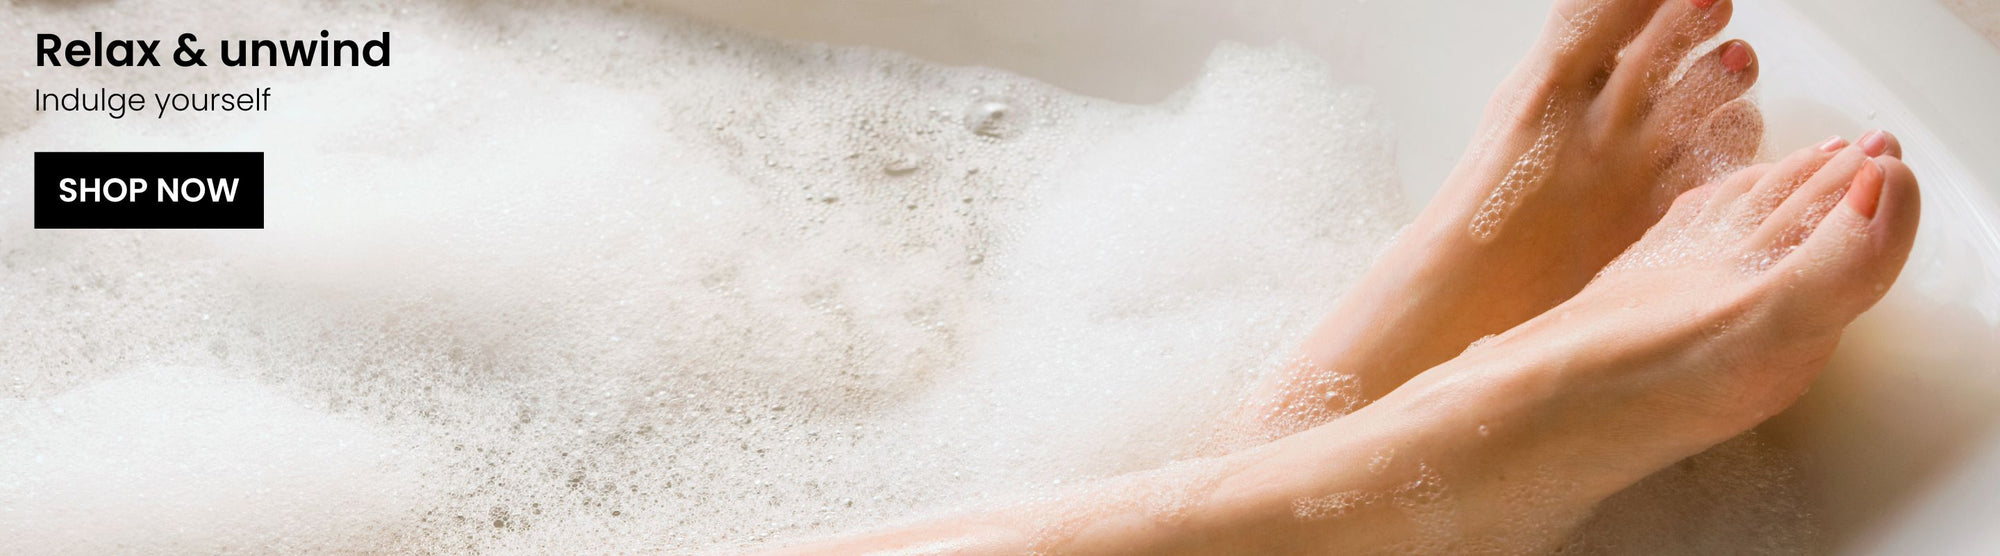 Bubble bath featuring relaxation